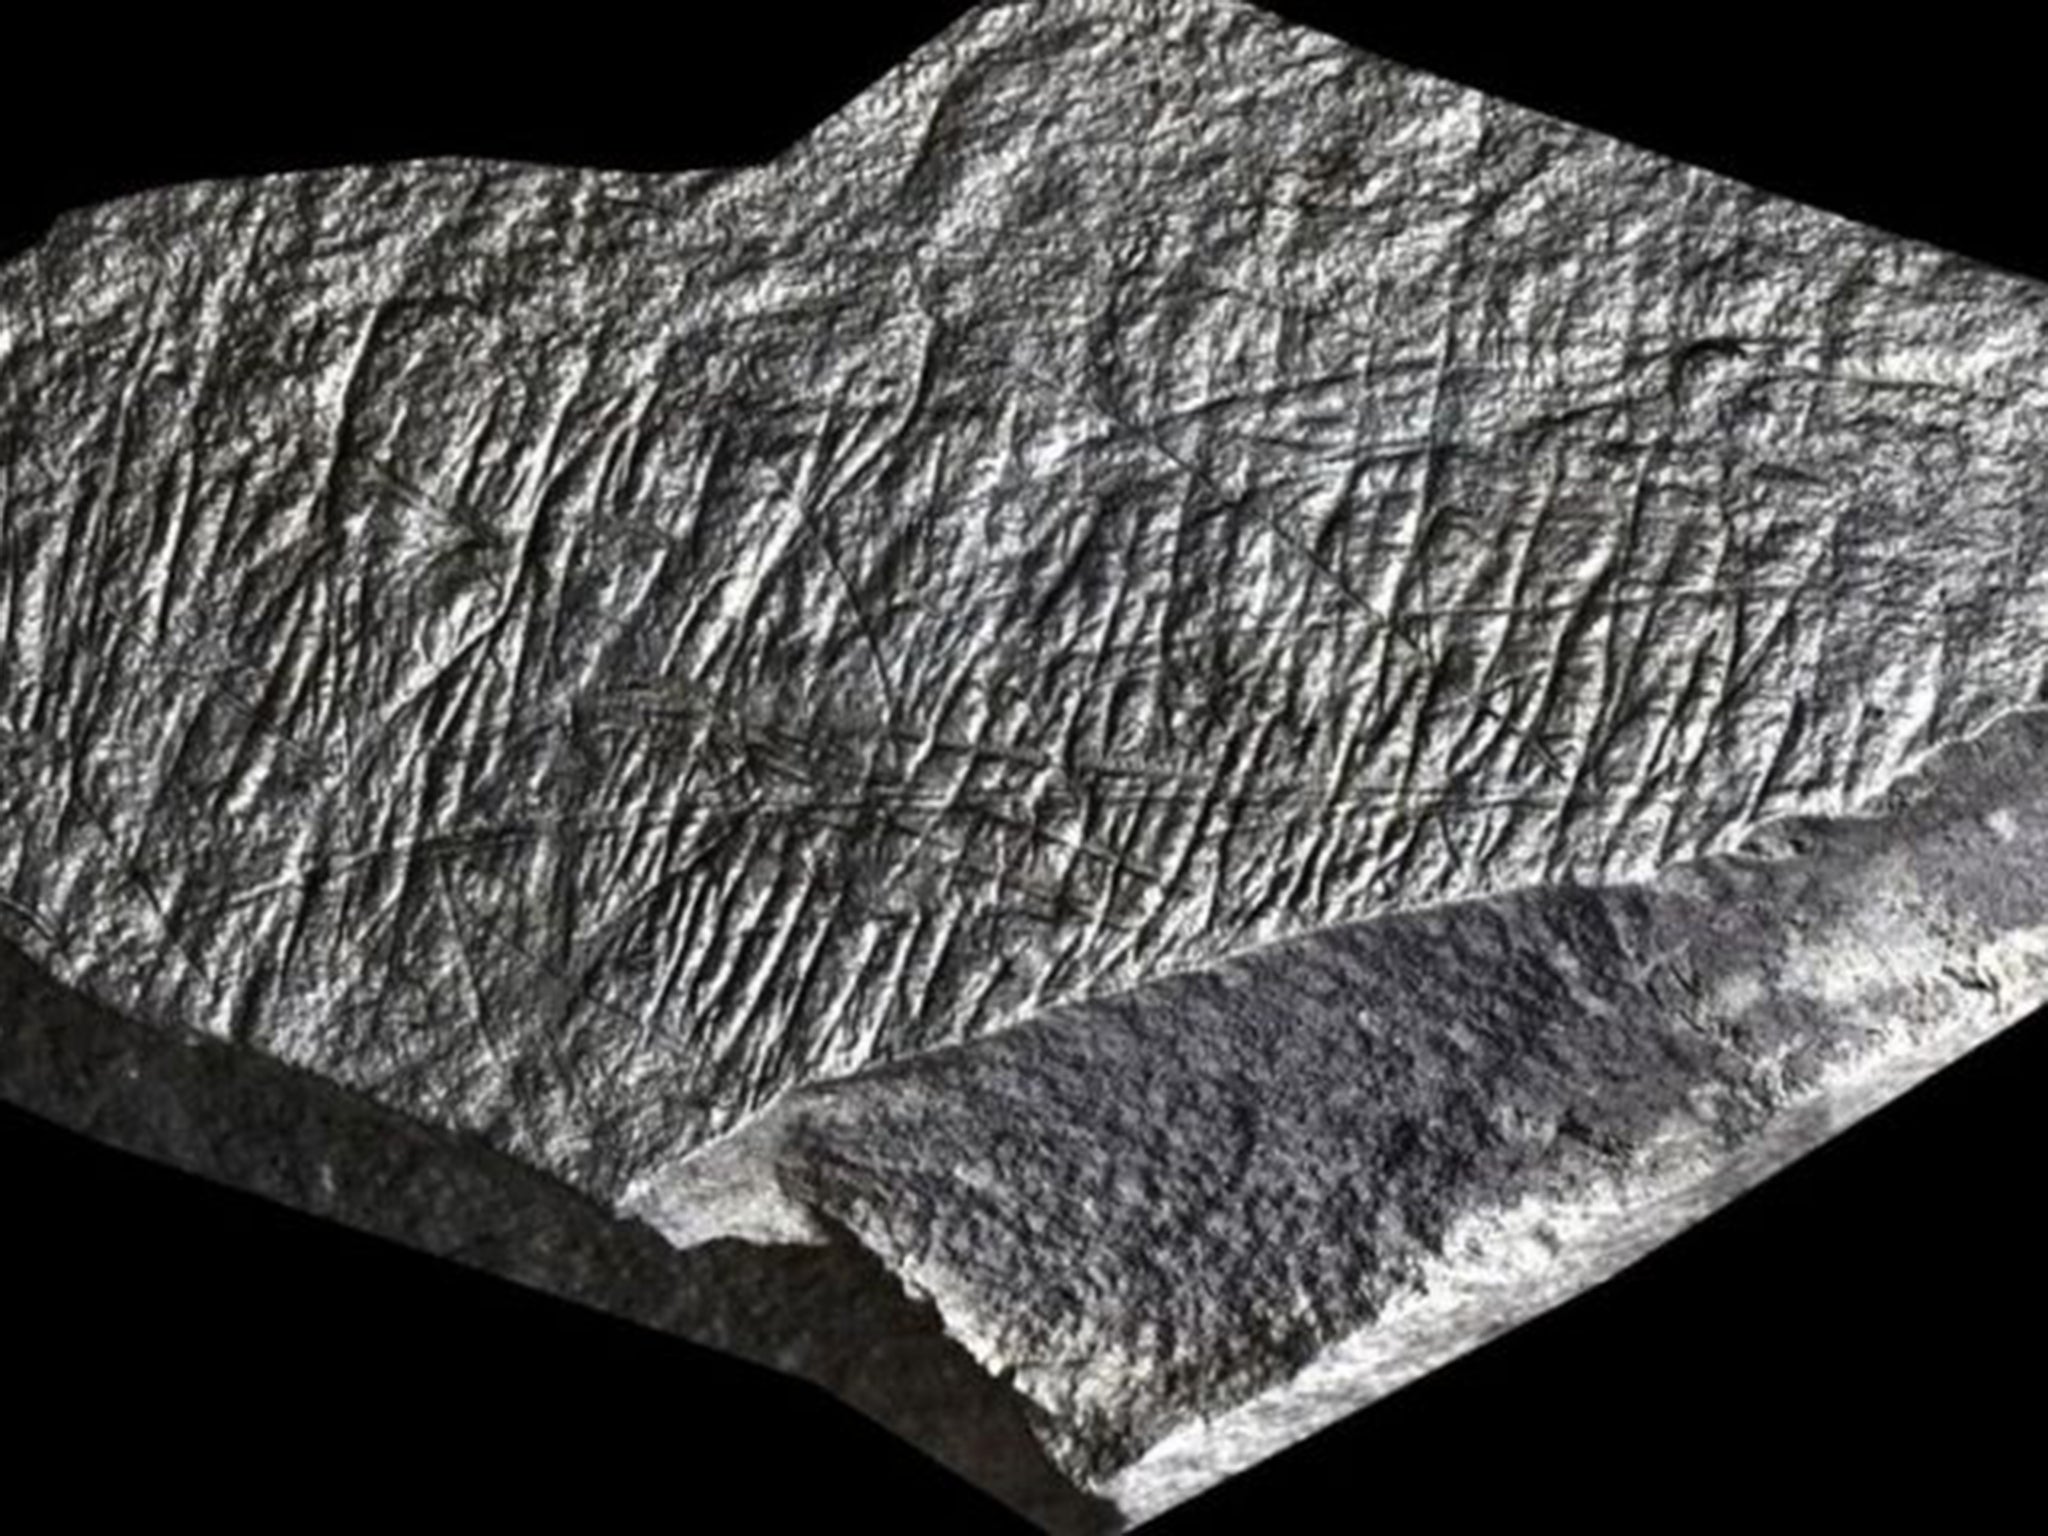 Ice Age engravings, thought to be 14,000 years old, have been found in Jersey